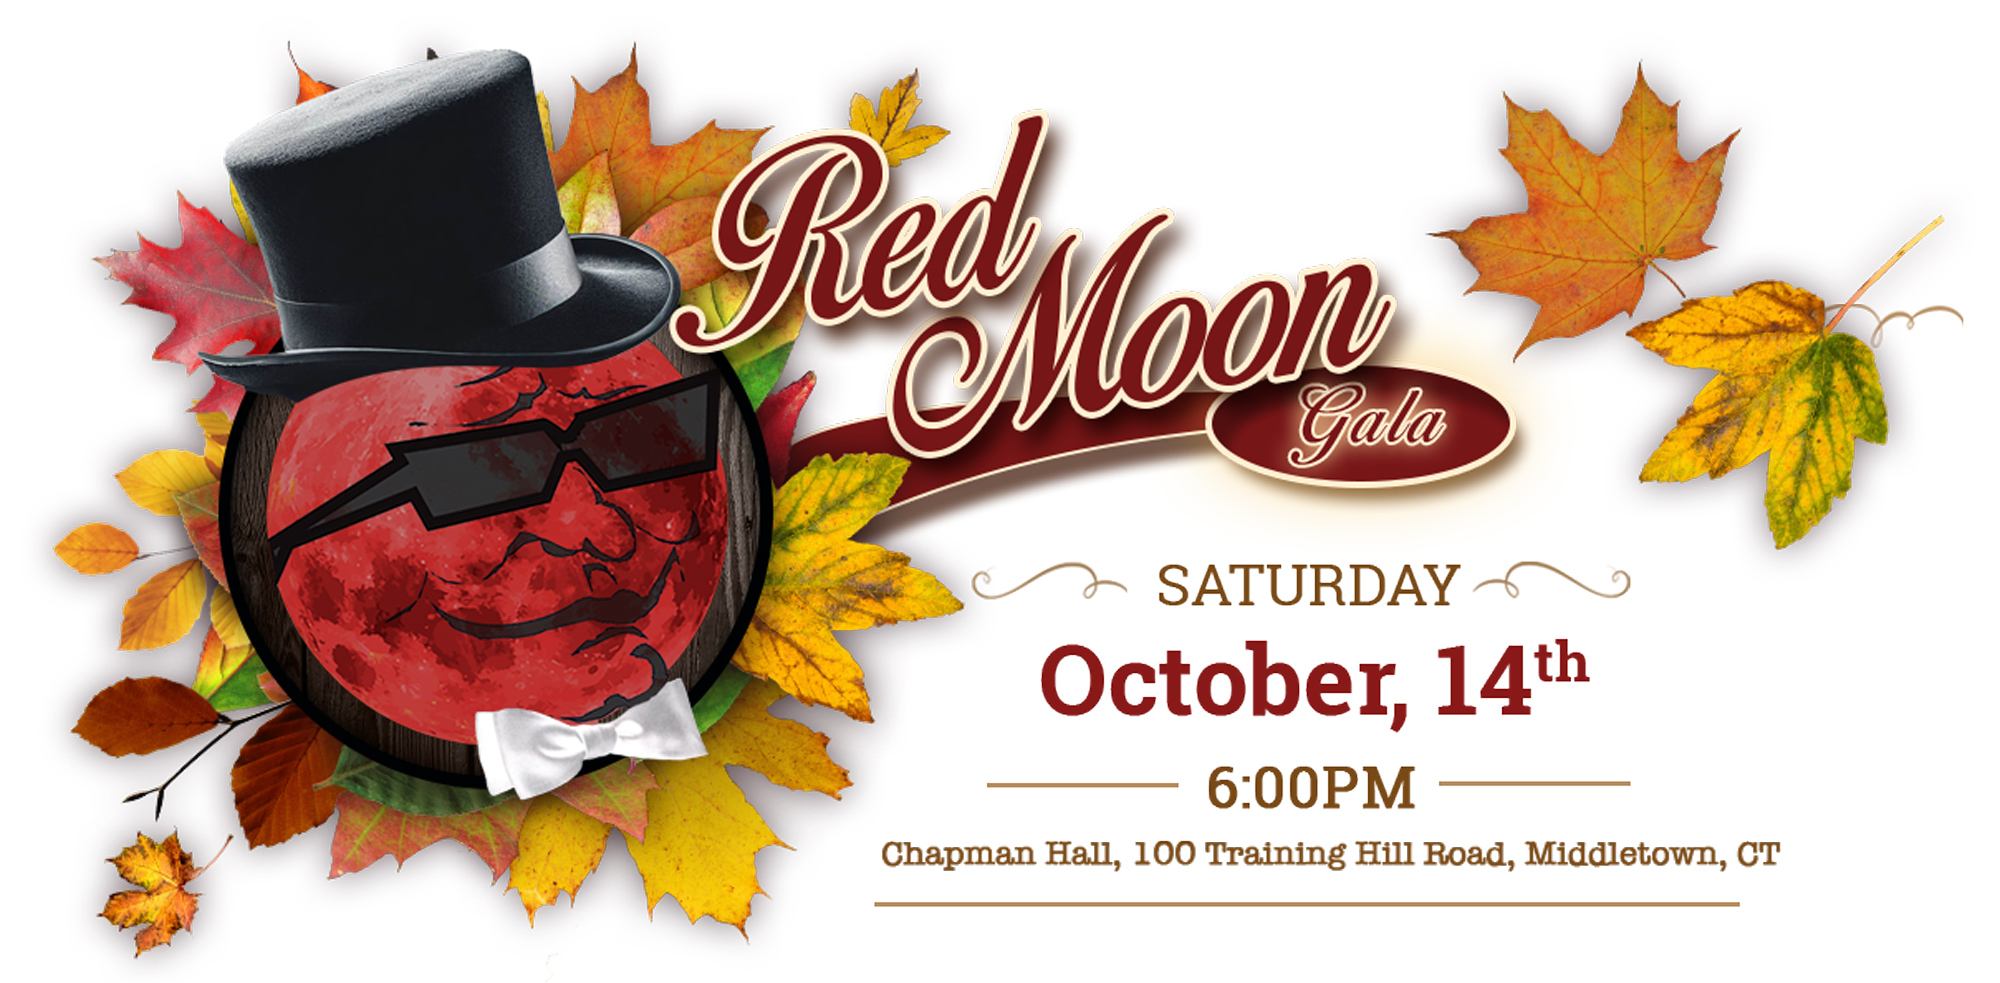 Red Moon Gala Saturday October 1 at 6 p.m. Location: 100 Training Hill Rd. Middletown